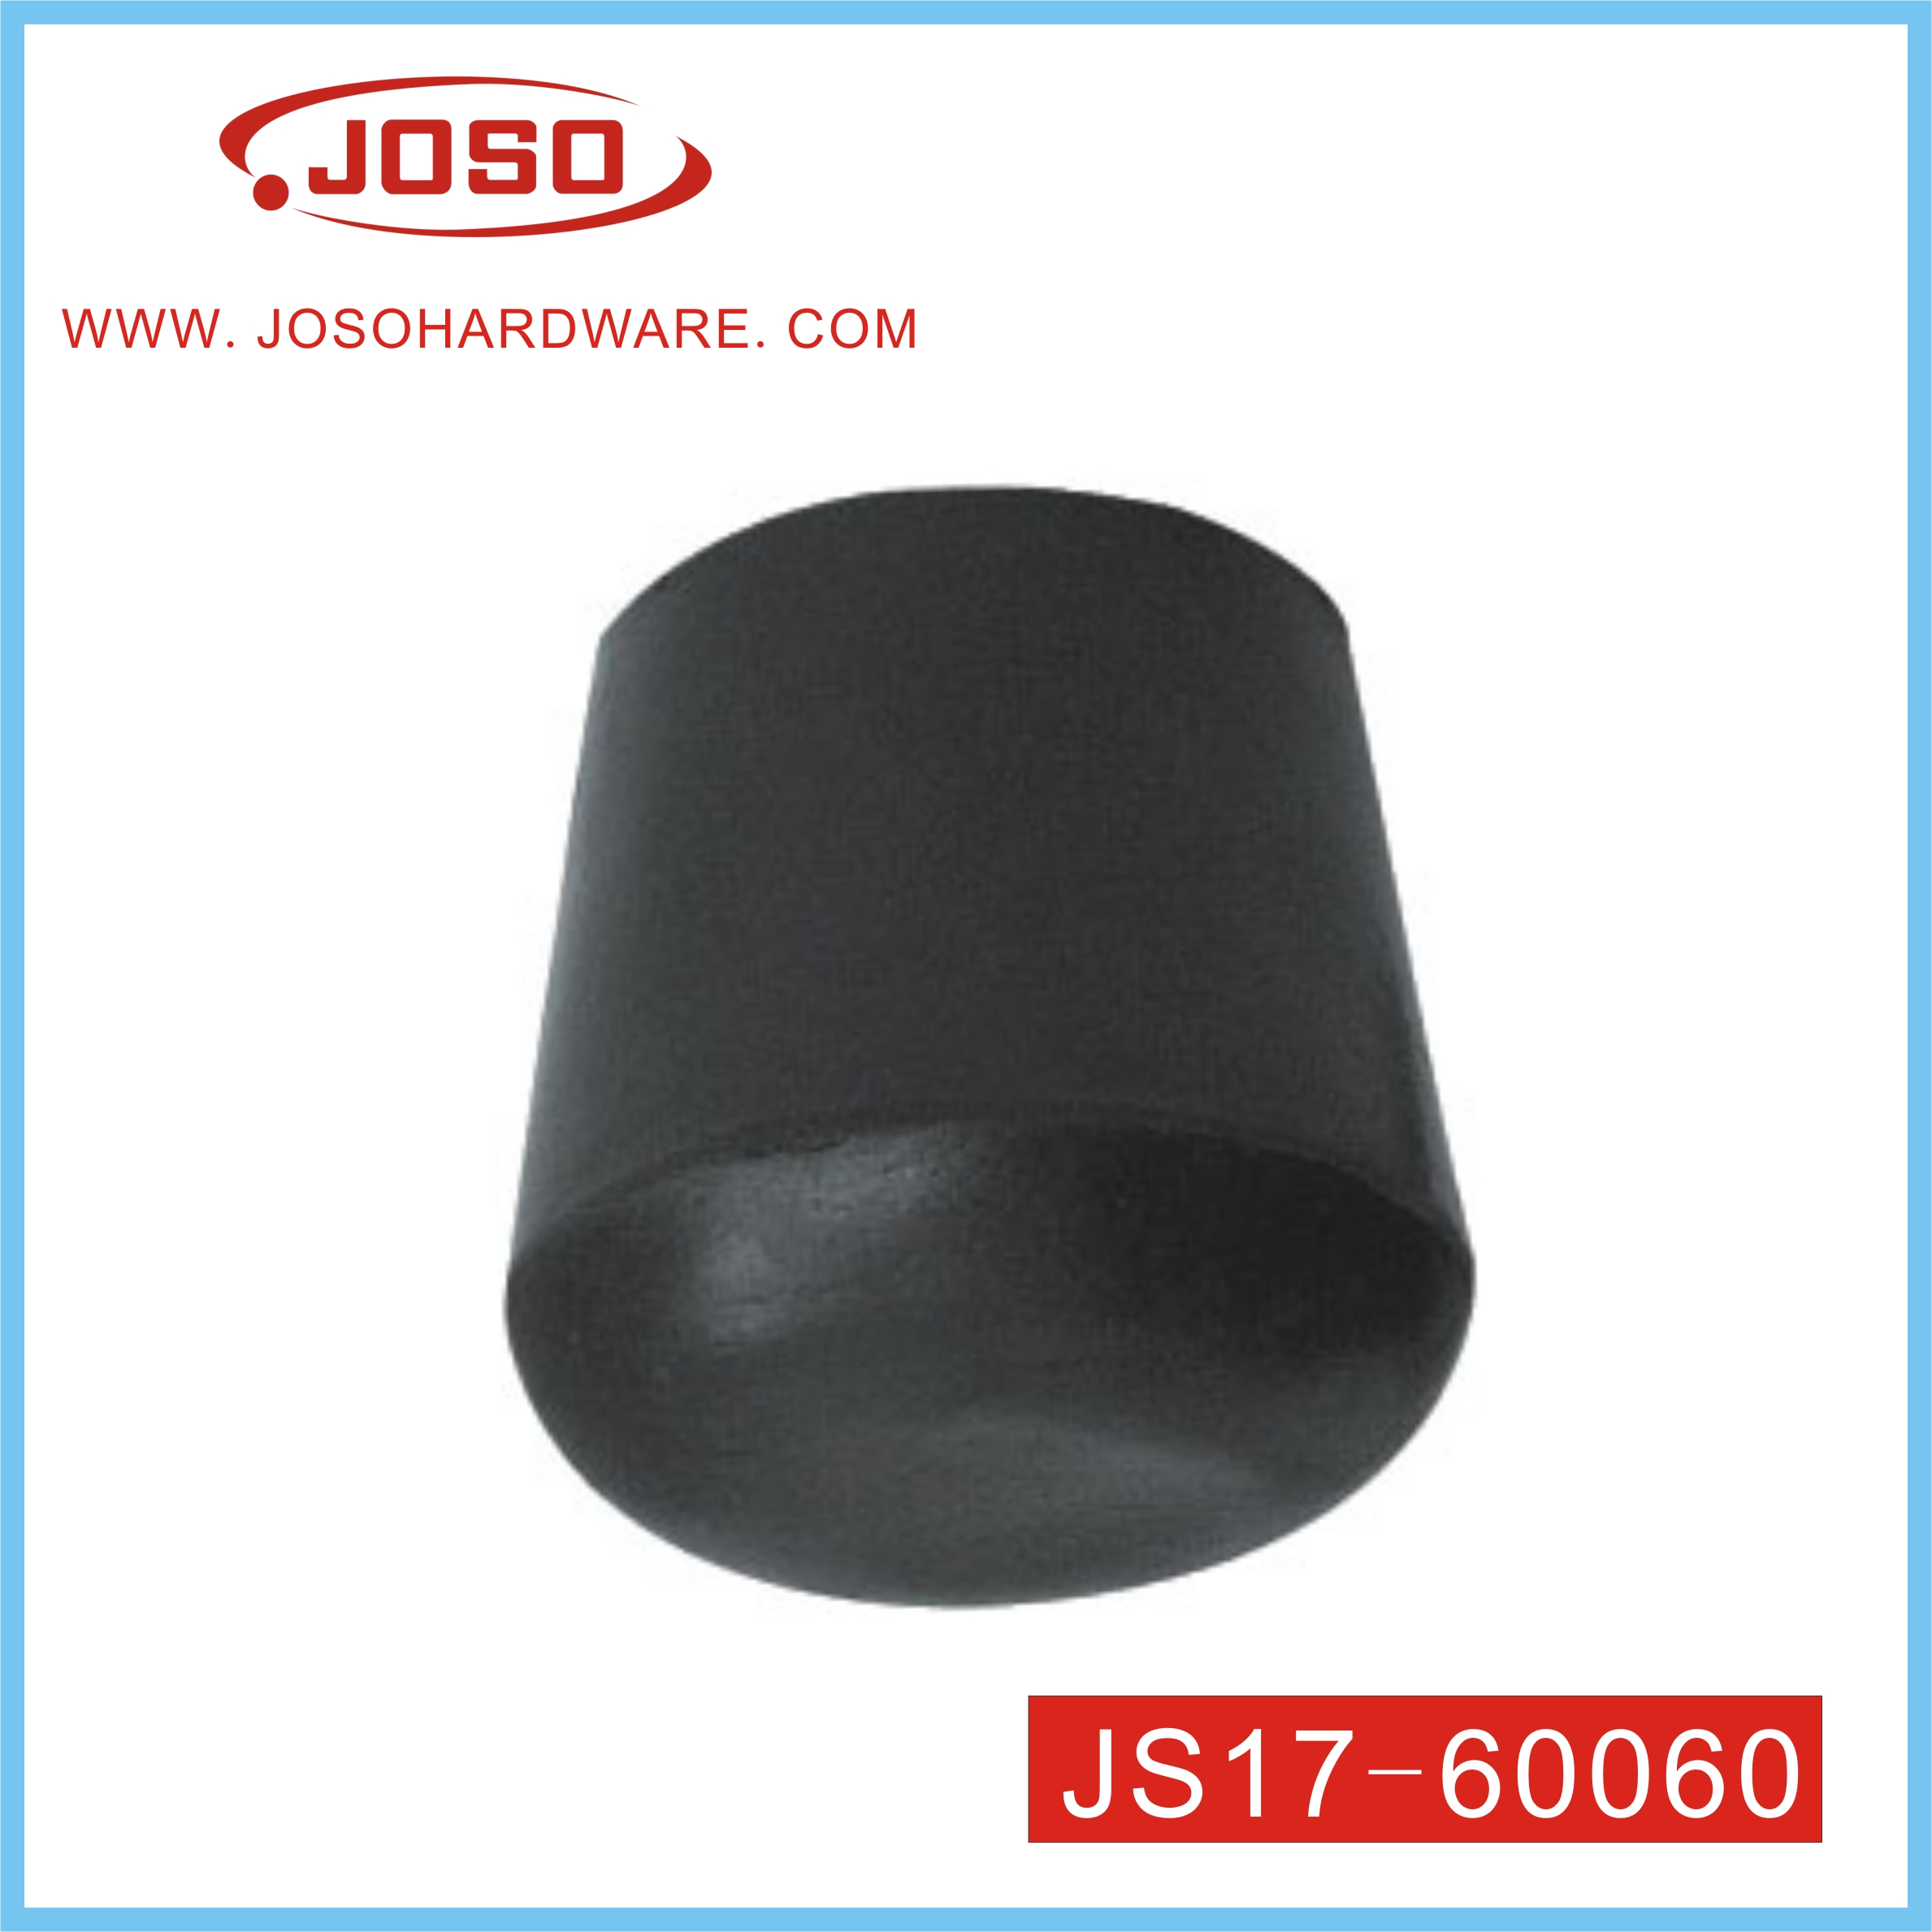 Plastic Chair Leg Feet Cover of Furniture Hardware for Protector